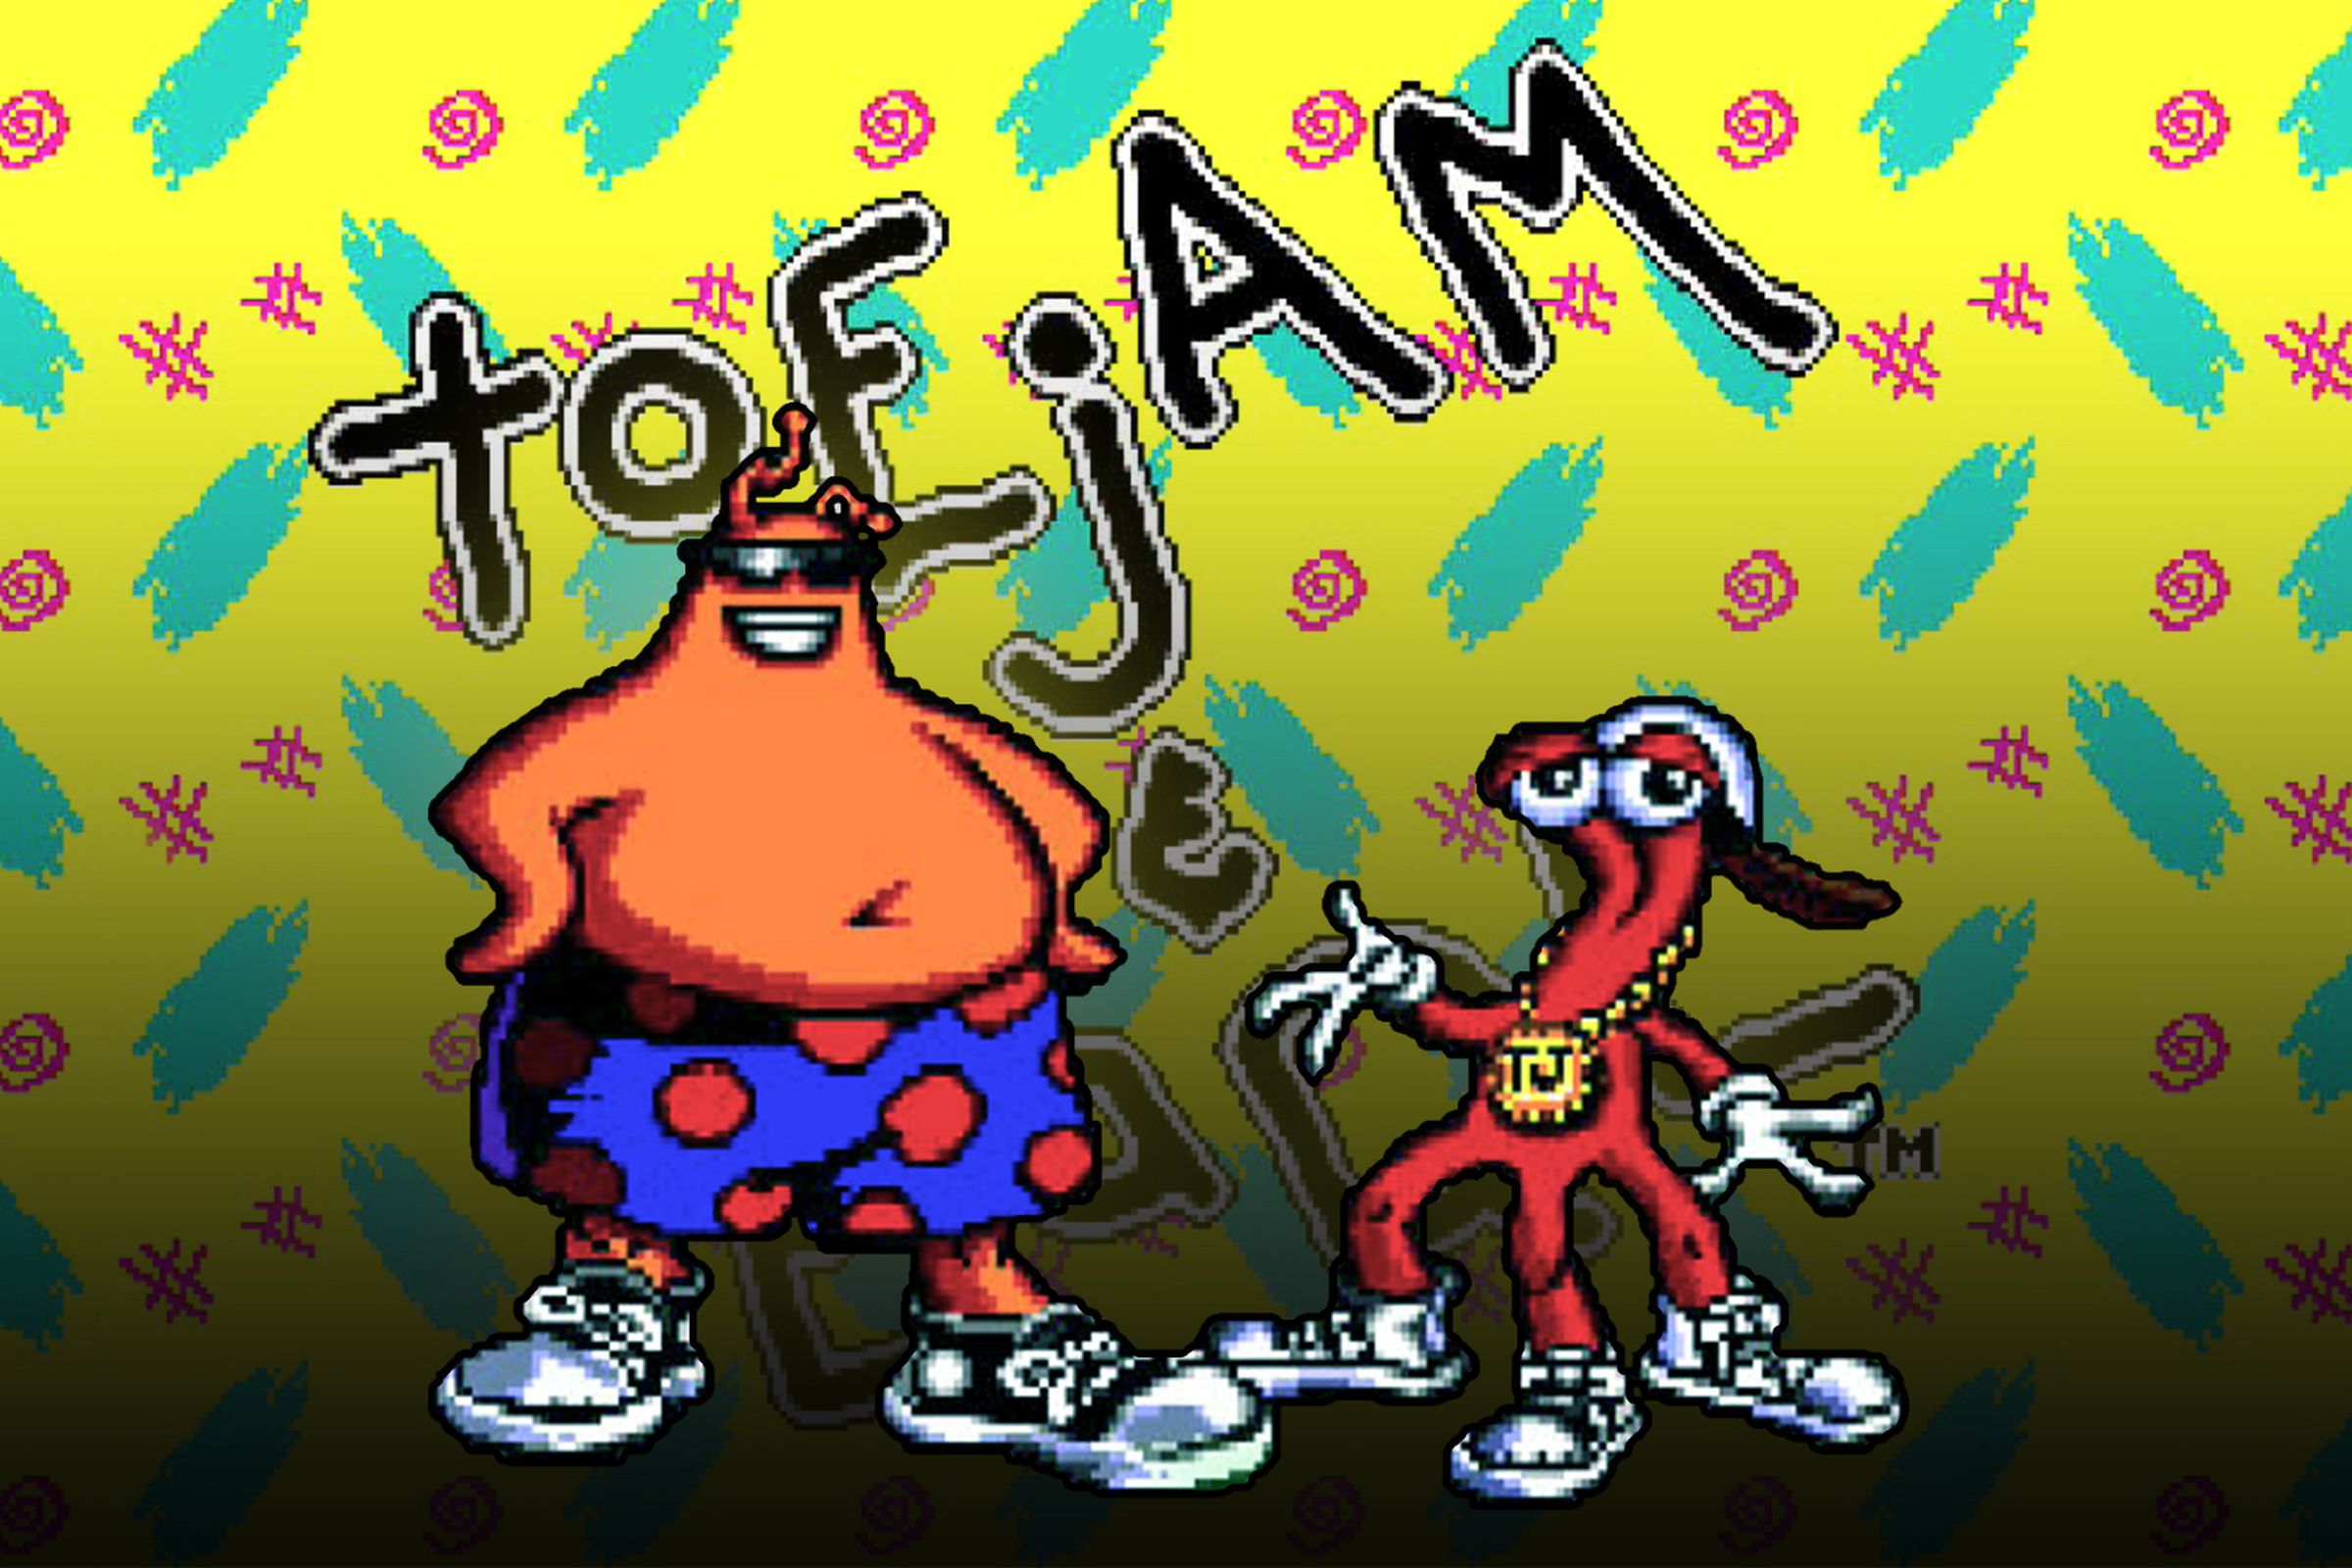 That’s ToeJam on the right, alongside Earl, in case you didn’t know.